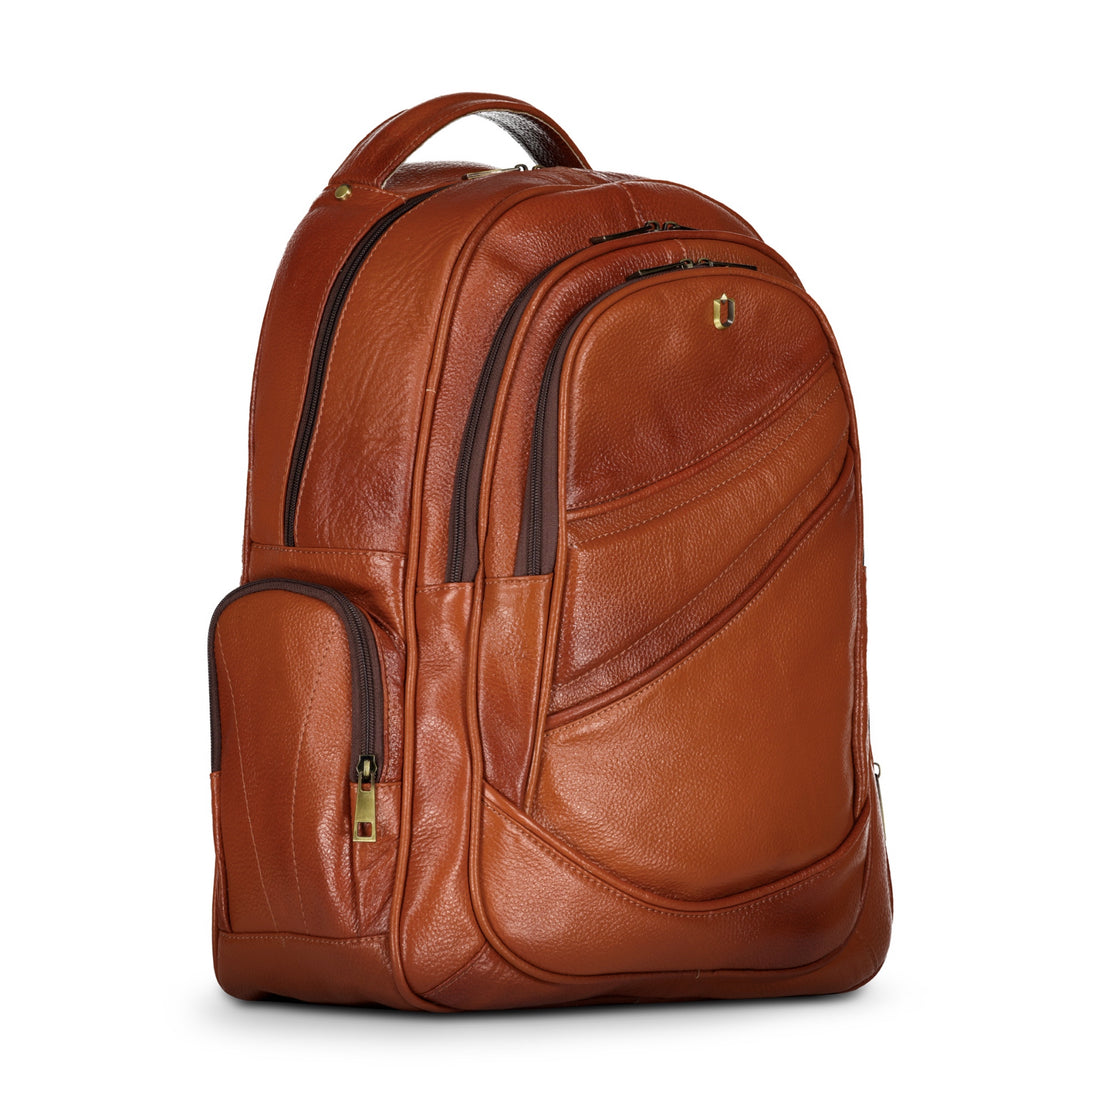 The Suza Backpack - Tan - Bags by Urbbana